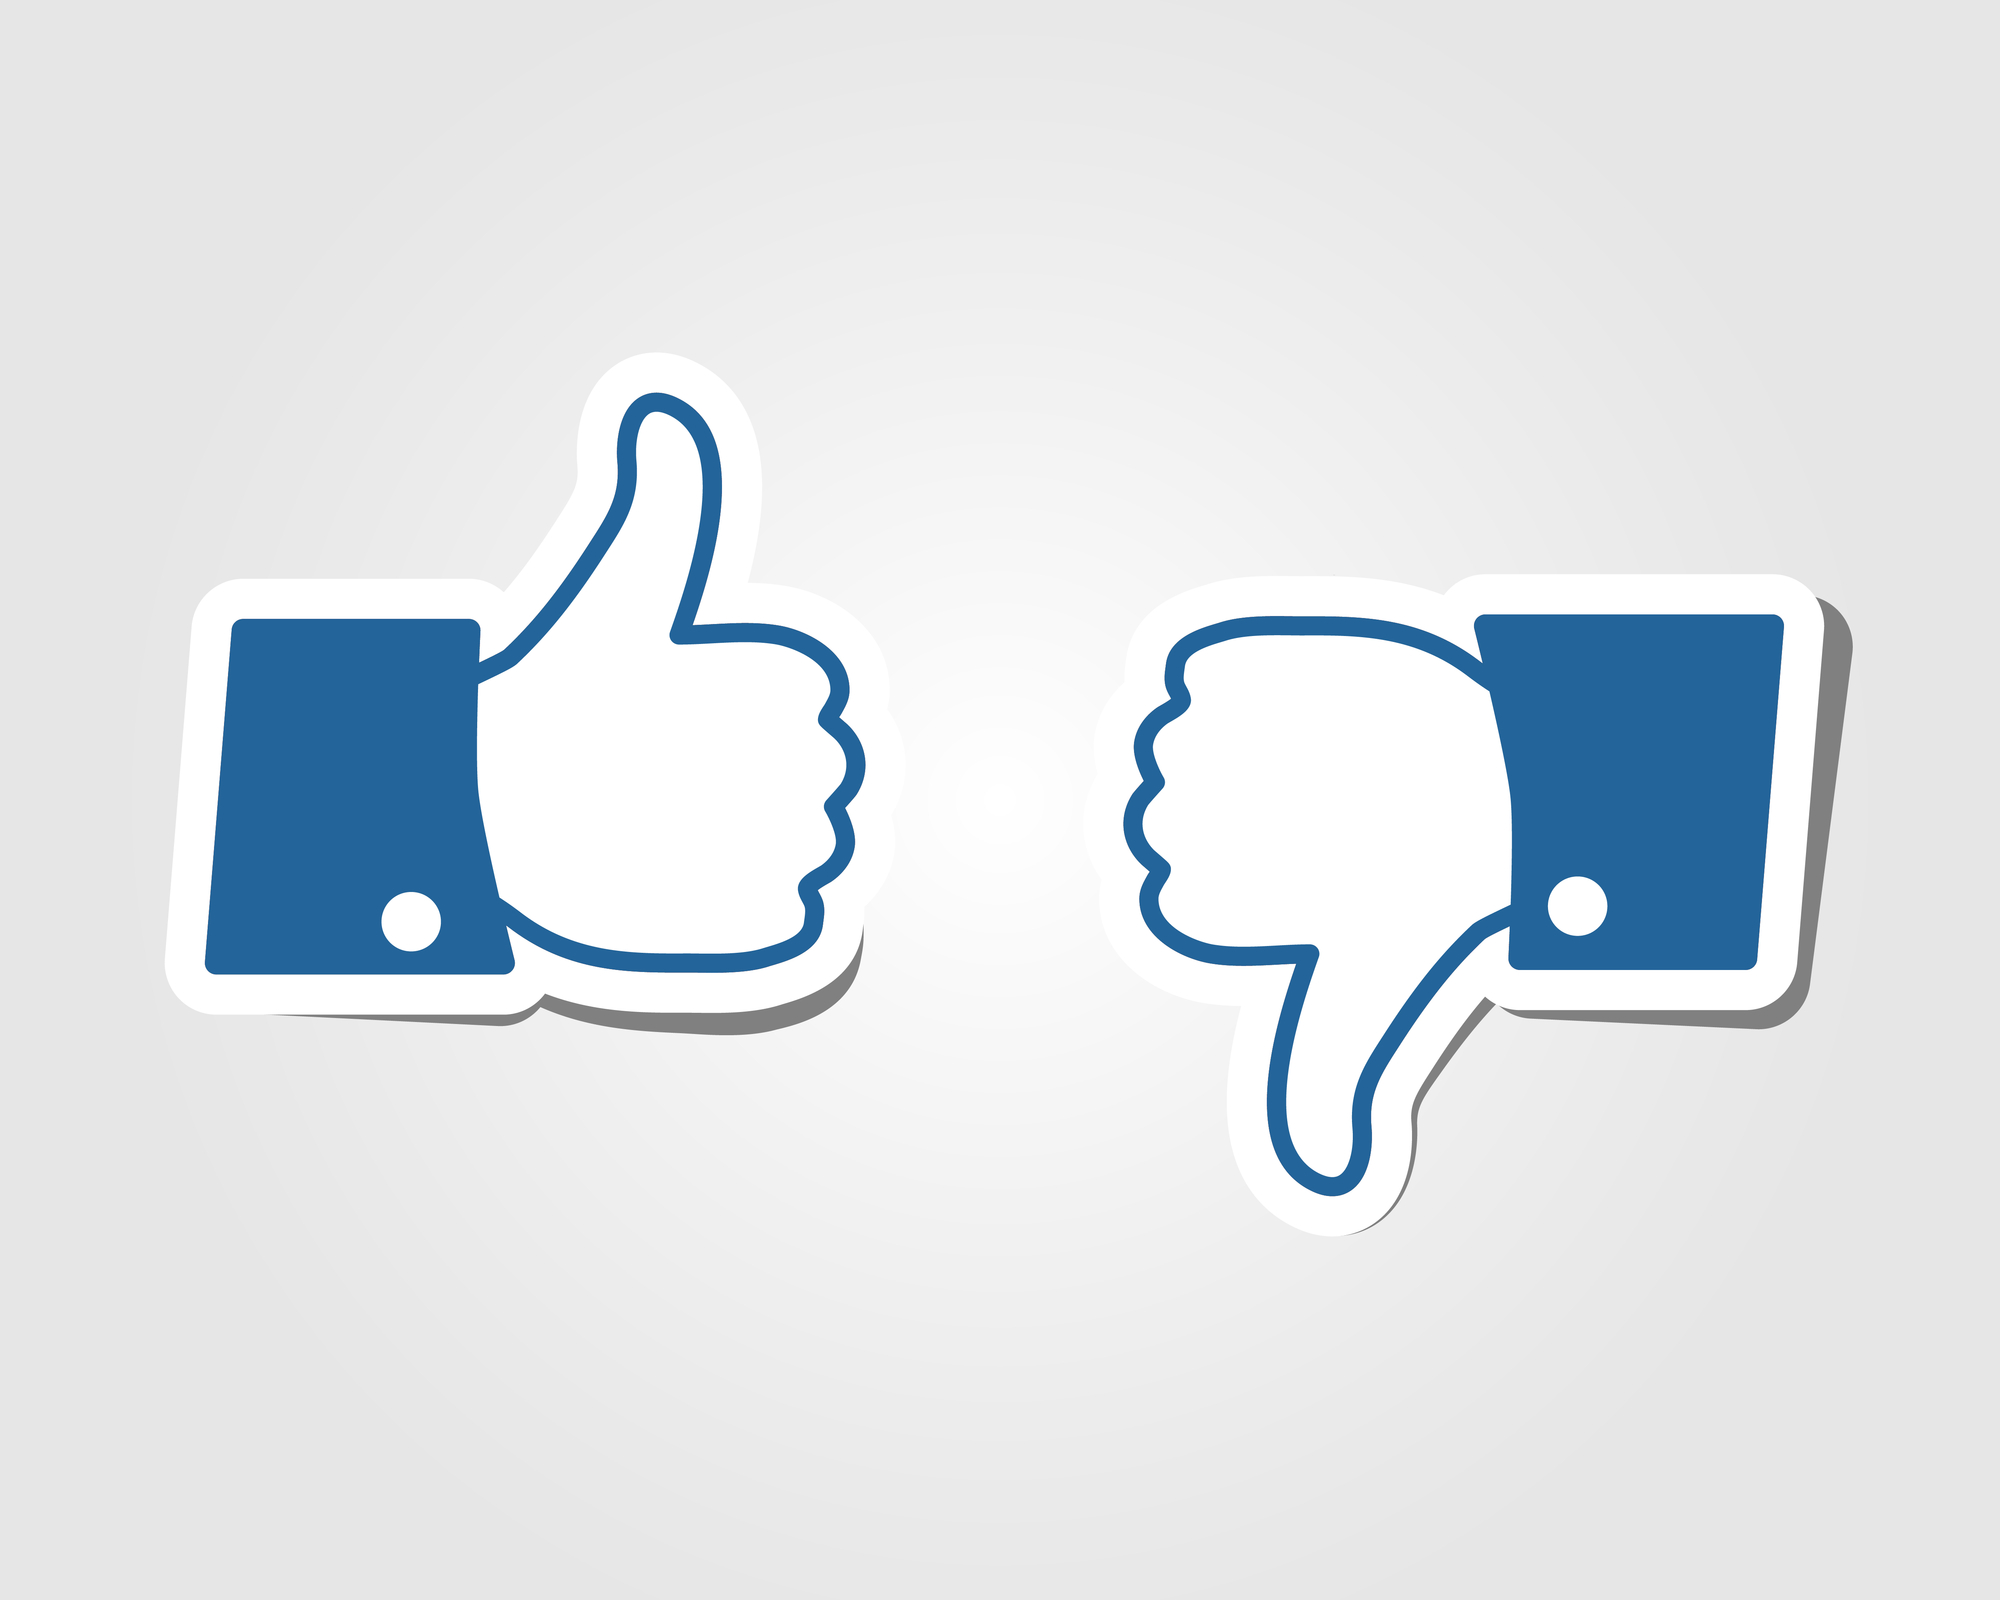 Is building a Facebook alternative worth the effort? MeWe thinks so